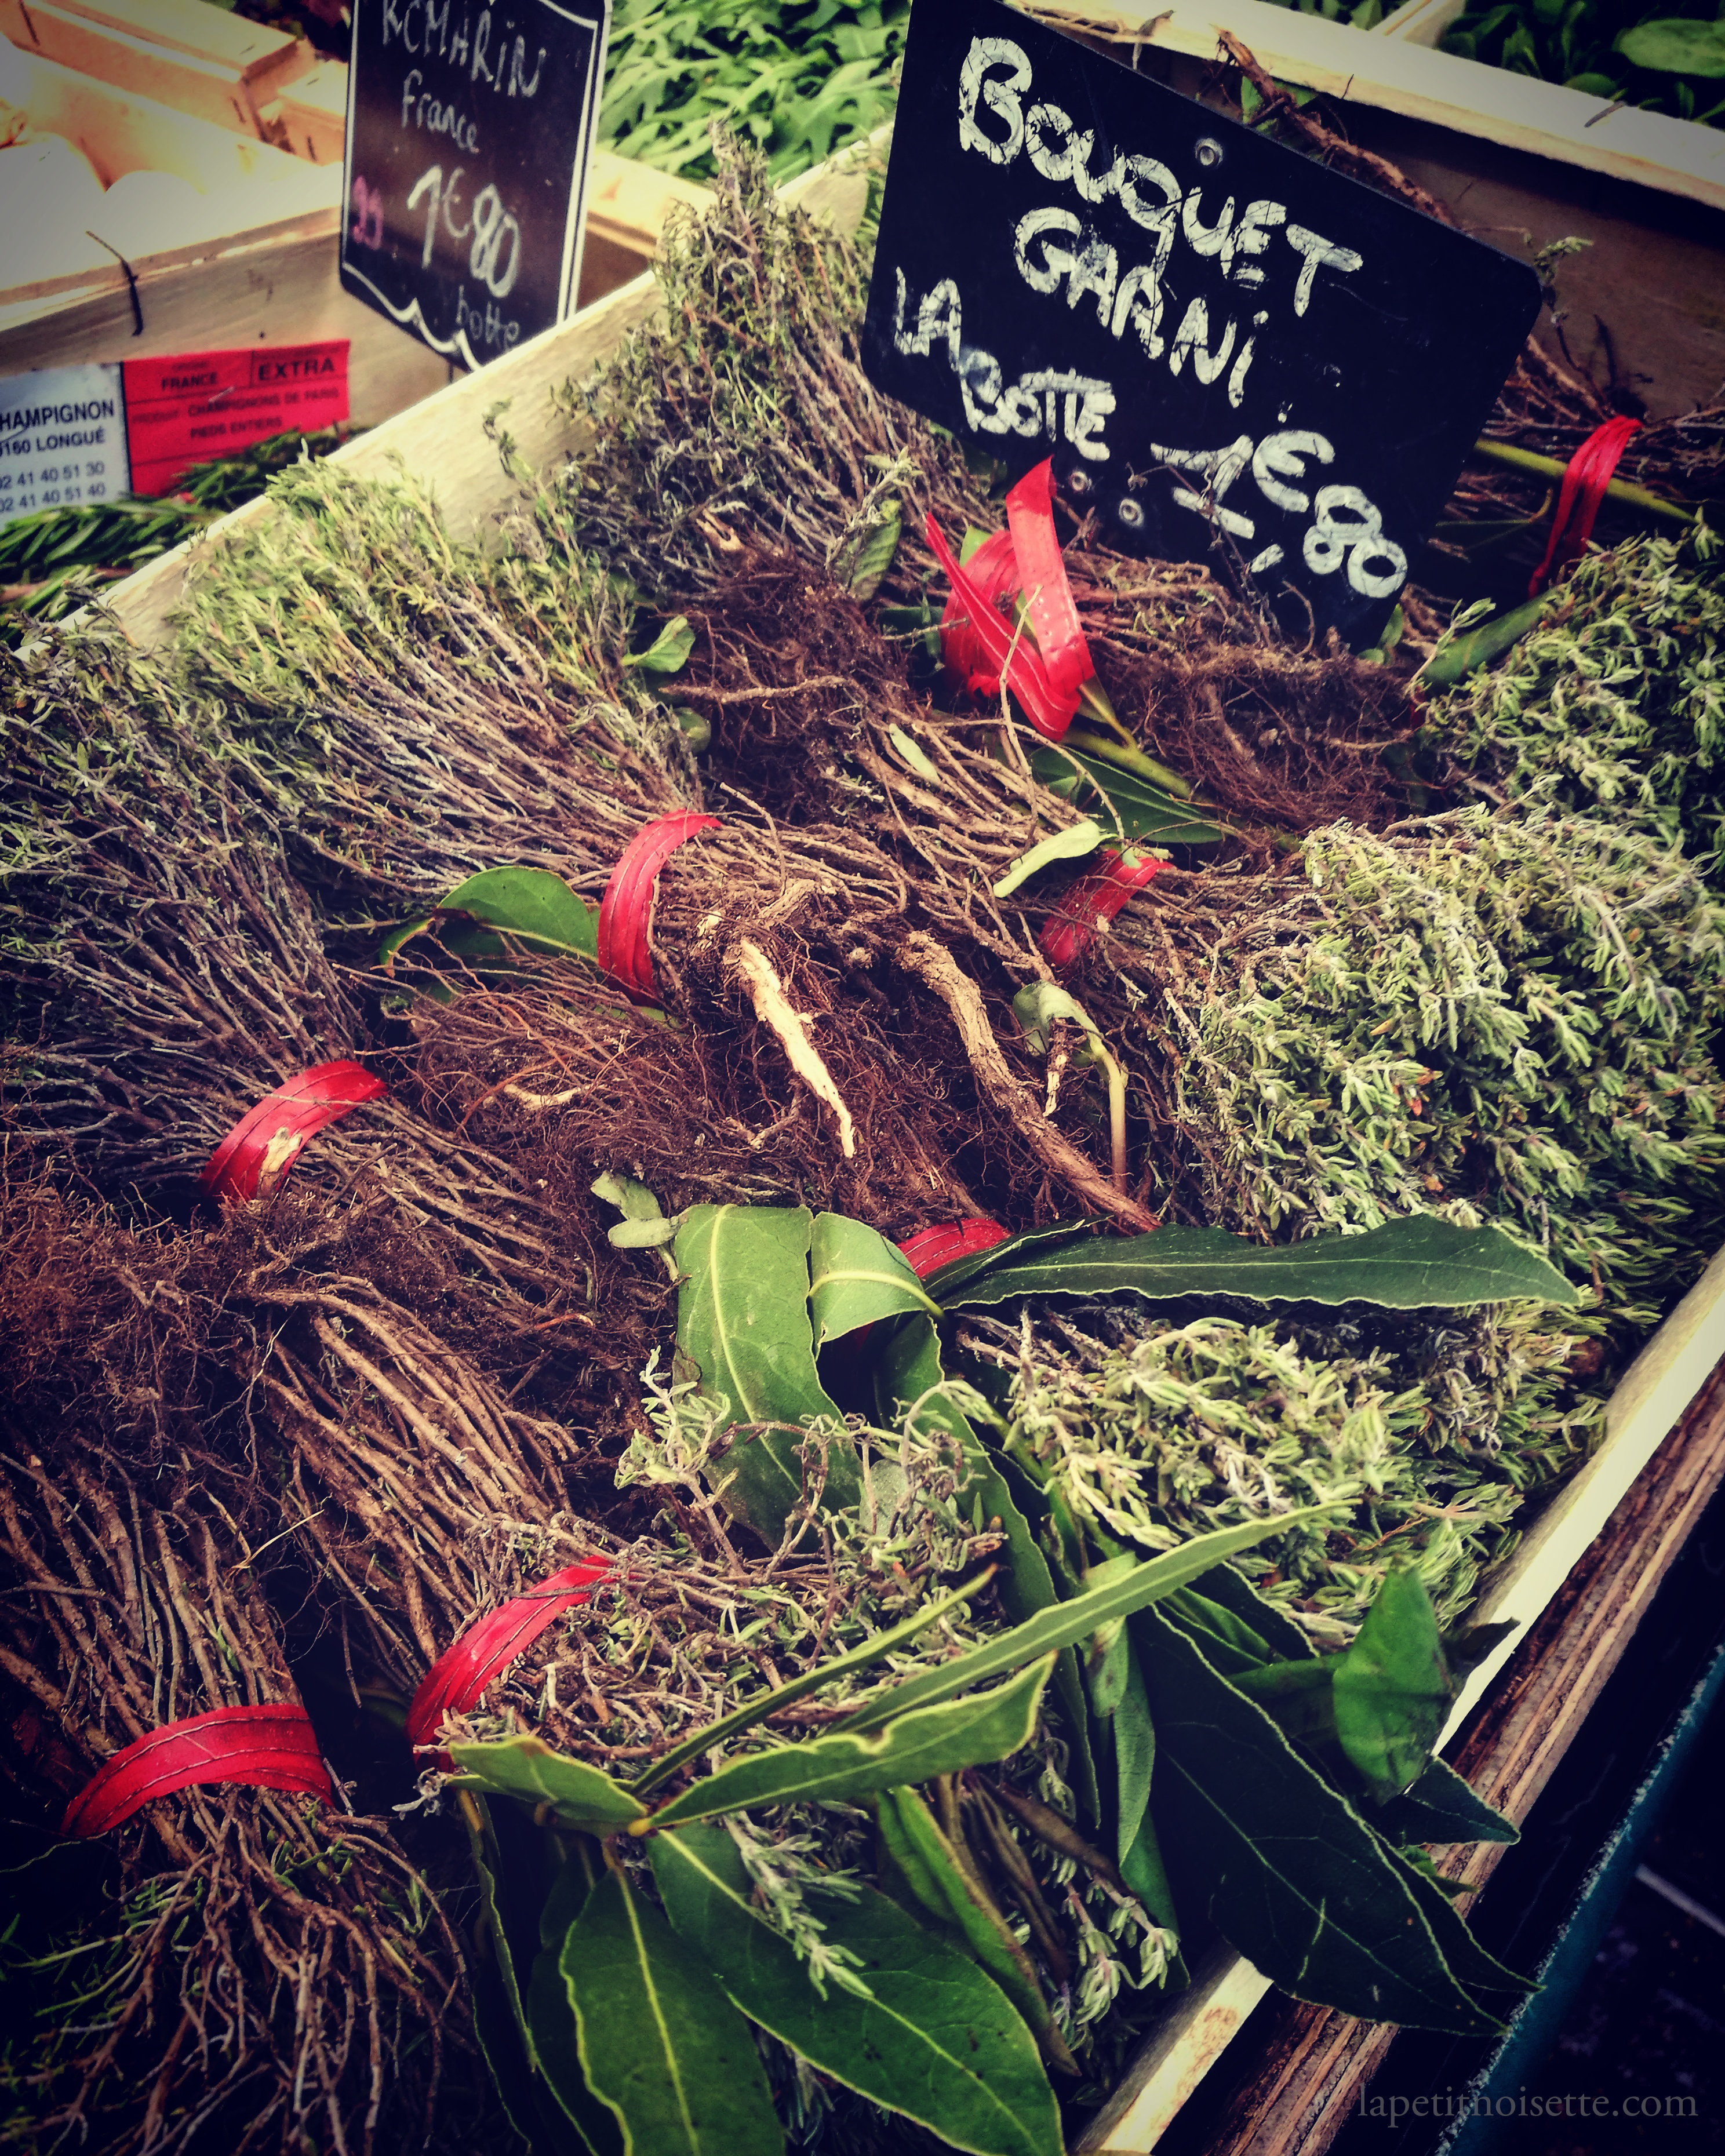 herbs on display in a market in France.